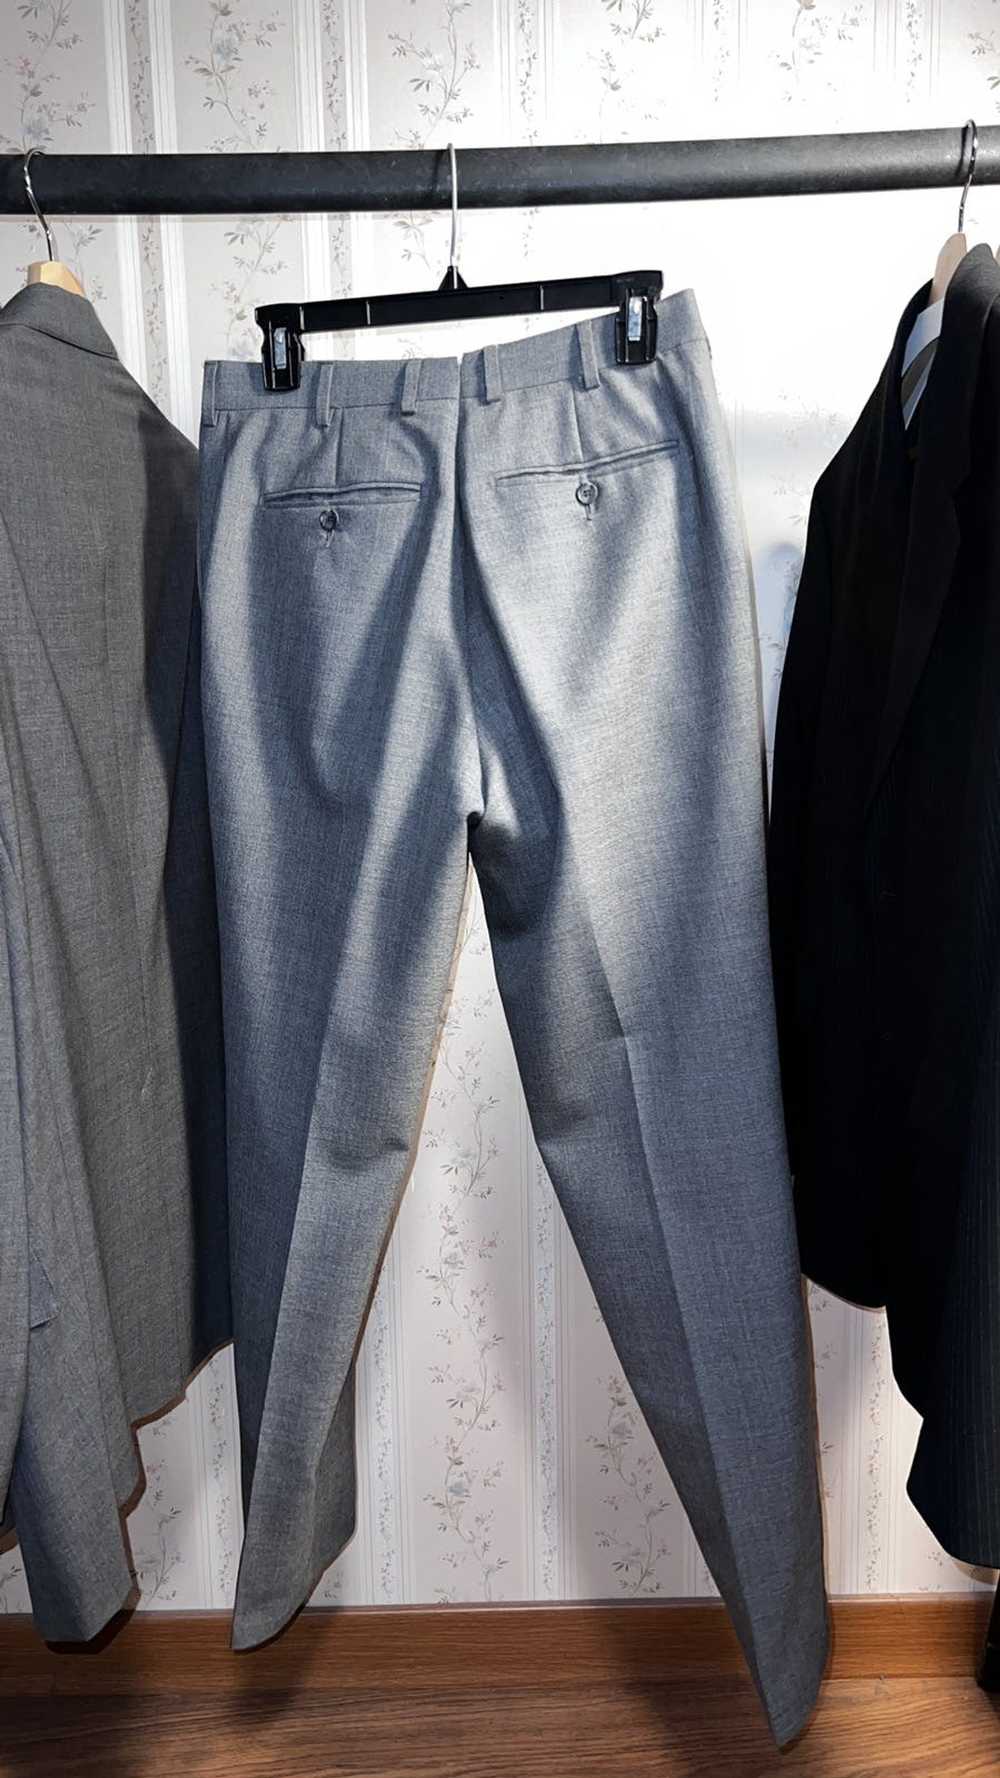 Suitsupply Suitsupply Brescia Pants - image 8